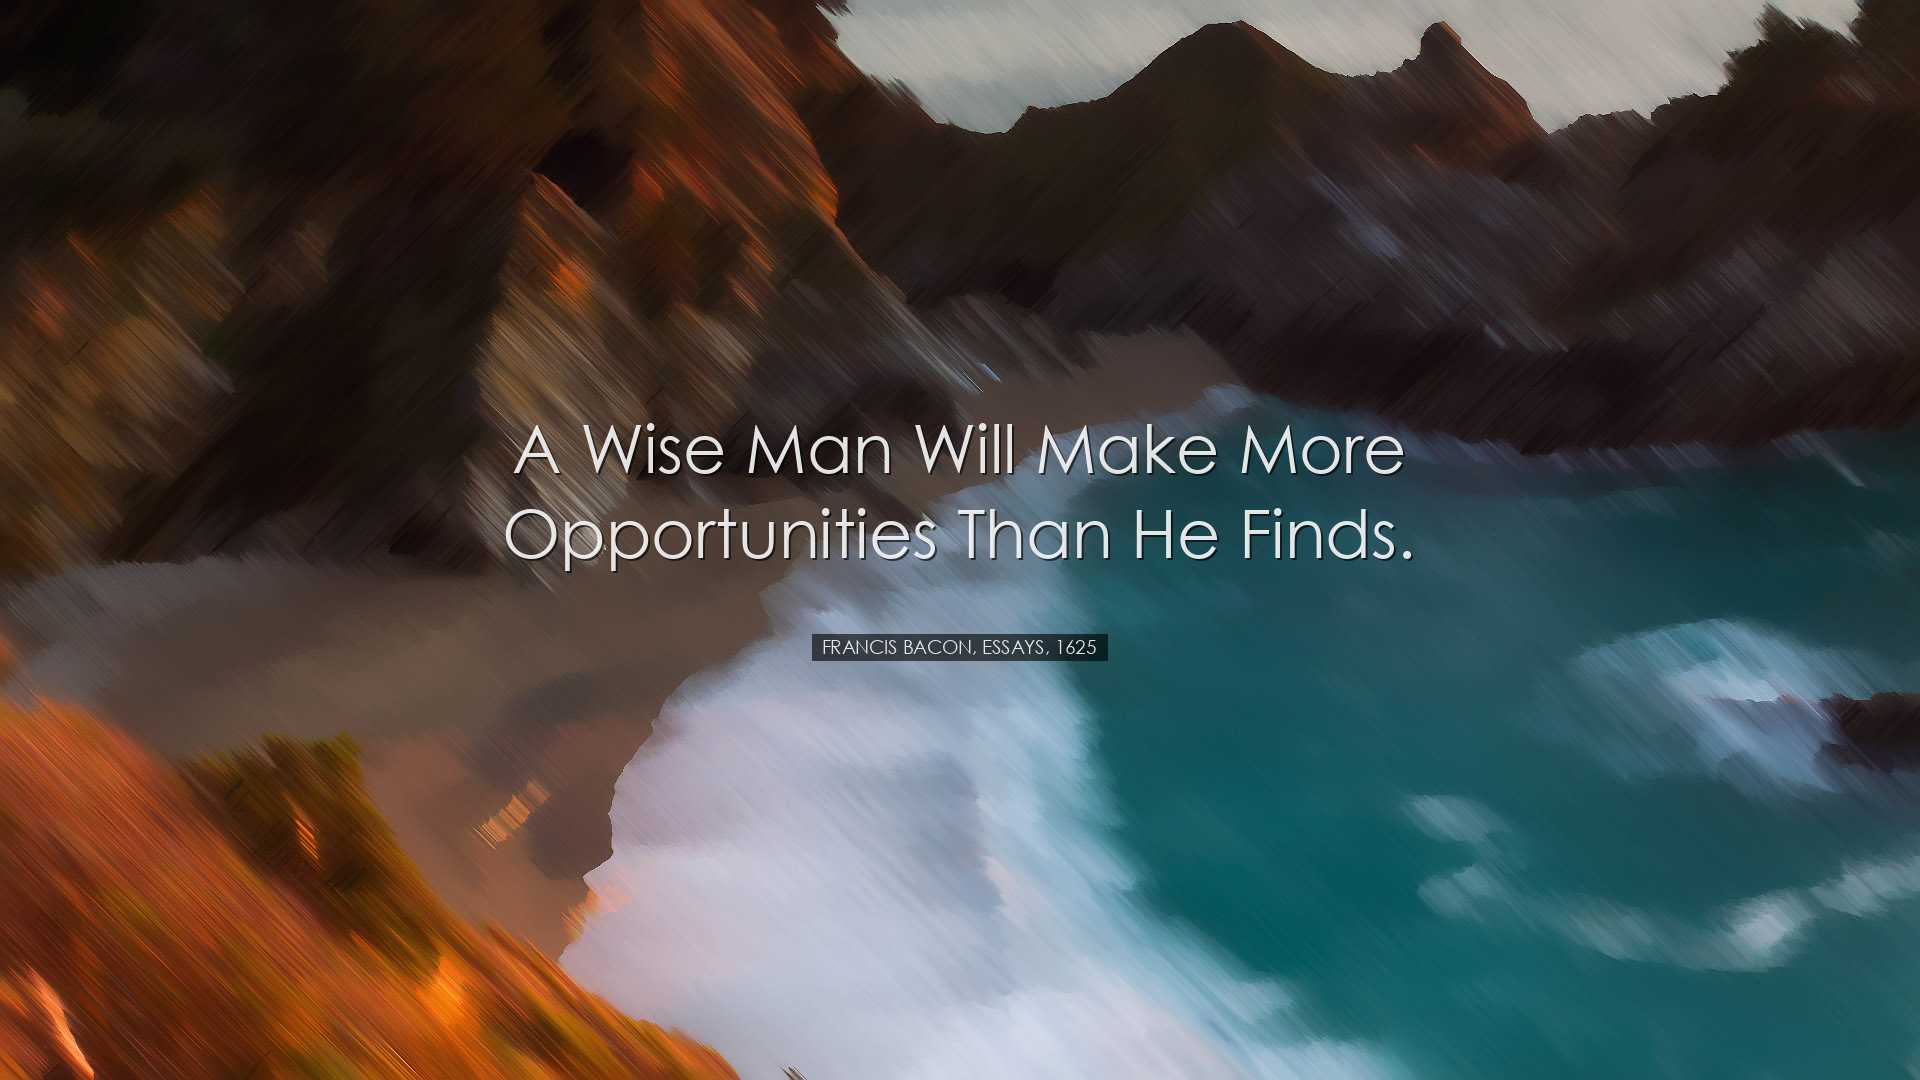 A wise man will make more opportunities than he finds. - Francis B